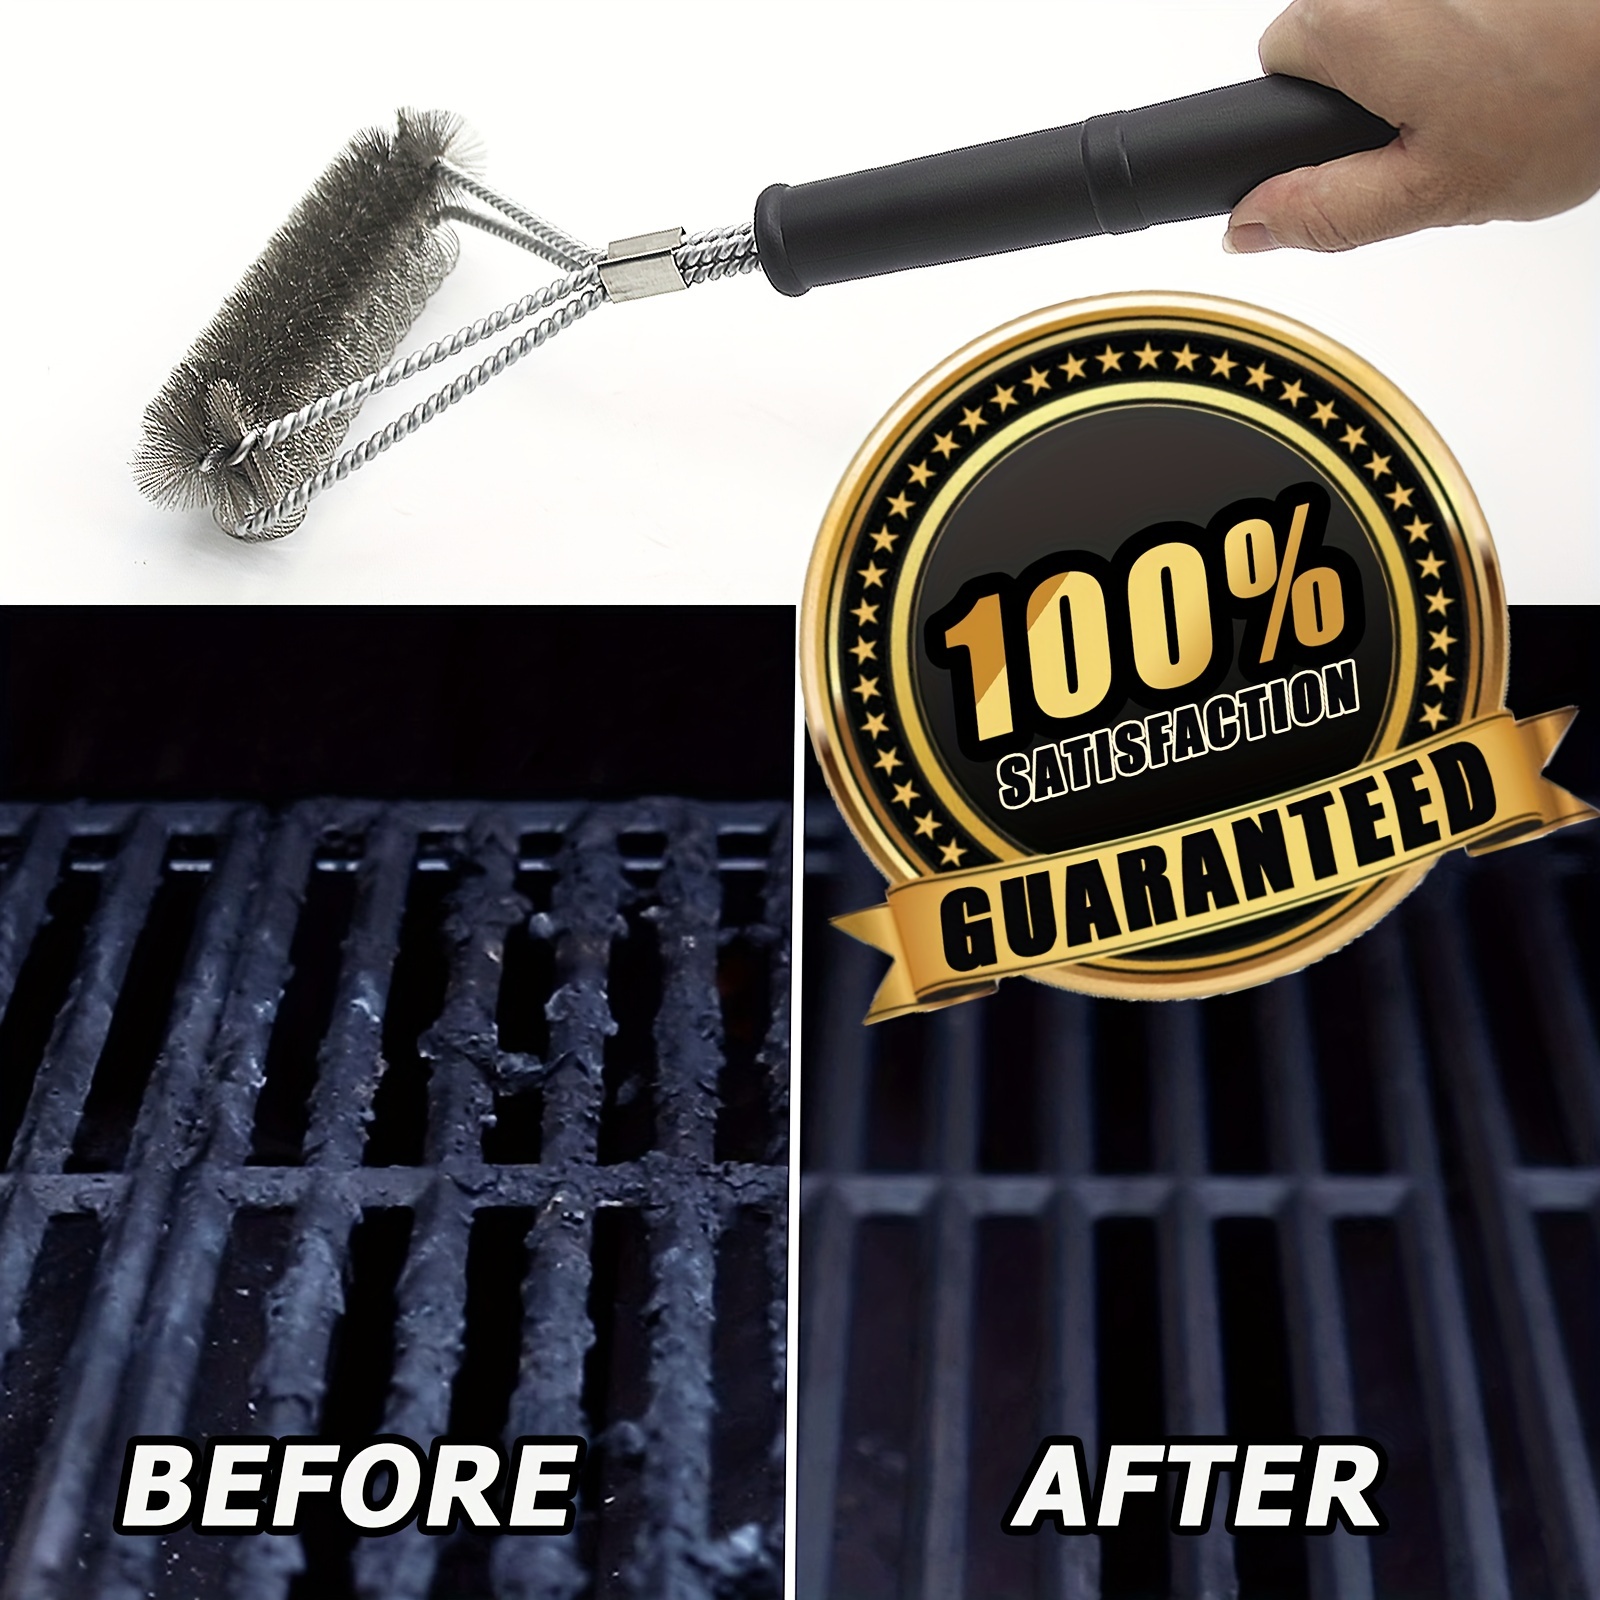 1pc Steel Wire Grill Brush For Cleaning Grill Grates, Bbq Brush